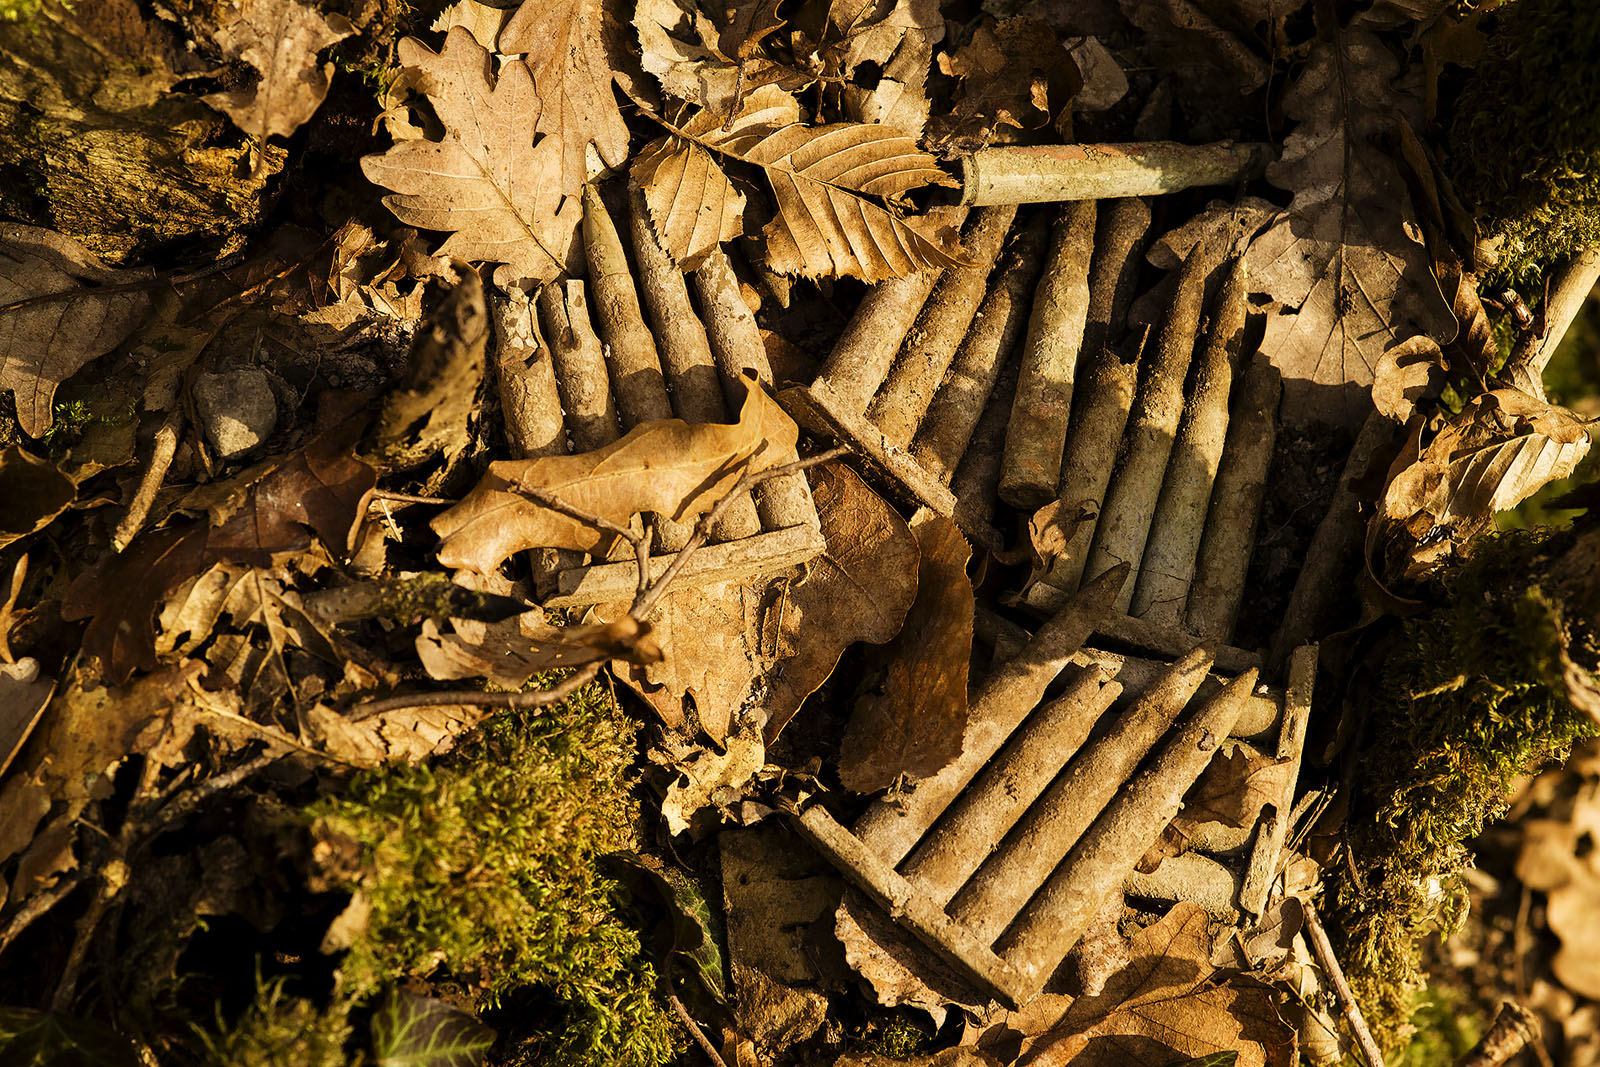 Modern photograph of rusted bullet casings amidst dead leaves.